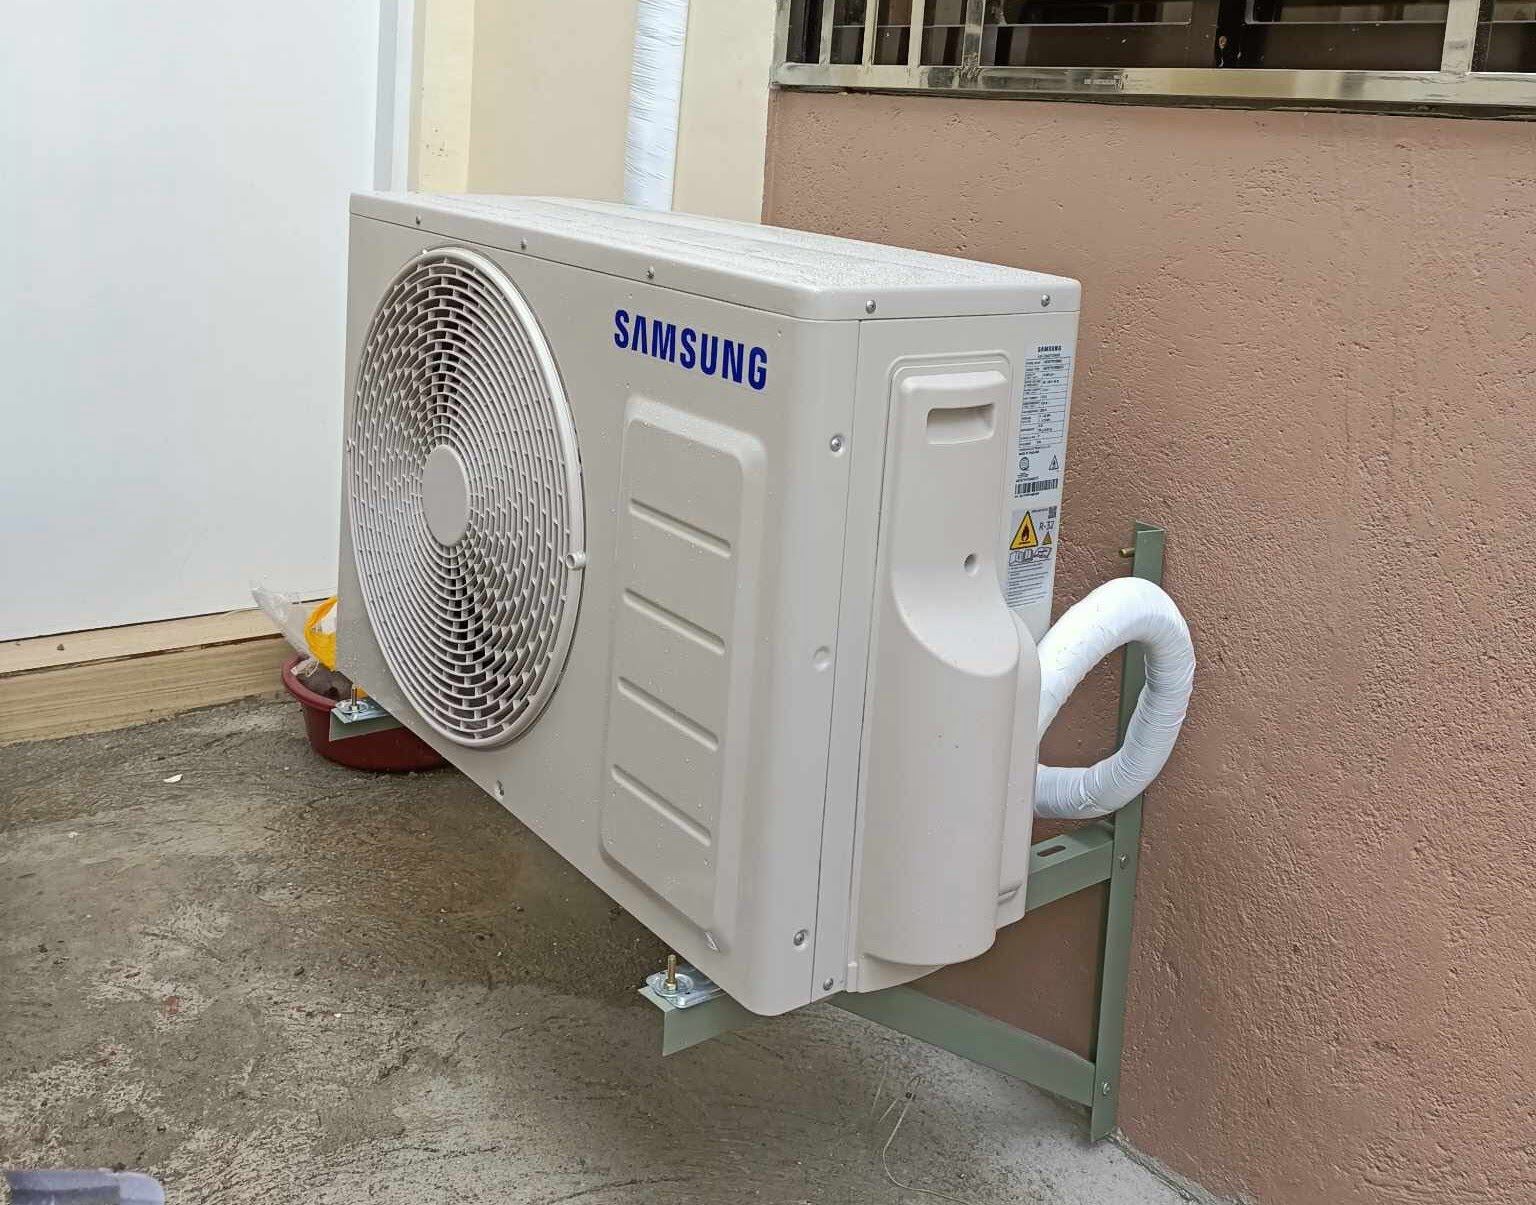 How To Fix The Error Code E239 For Samsung Air Conditioner